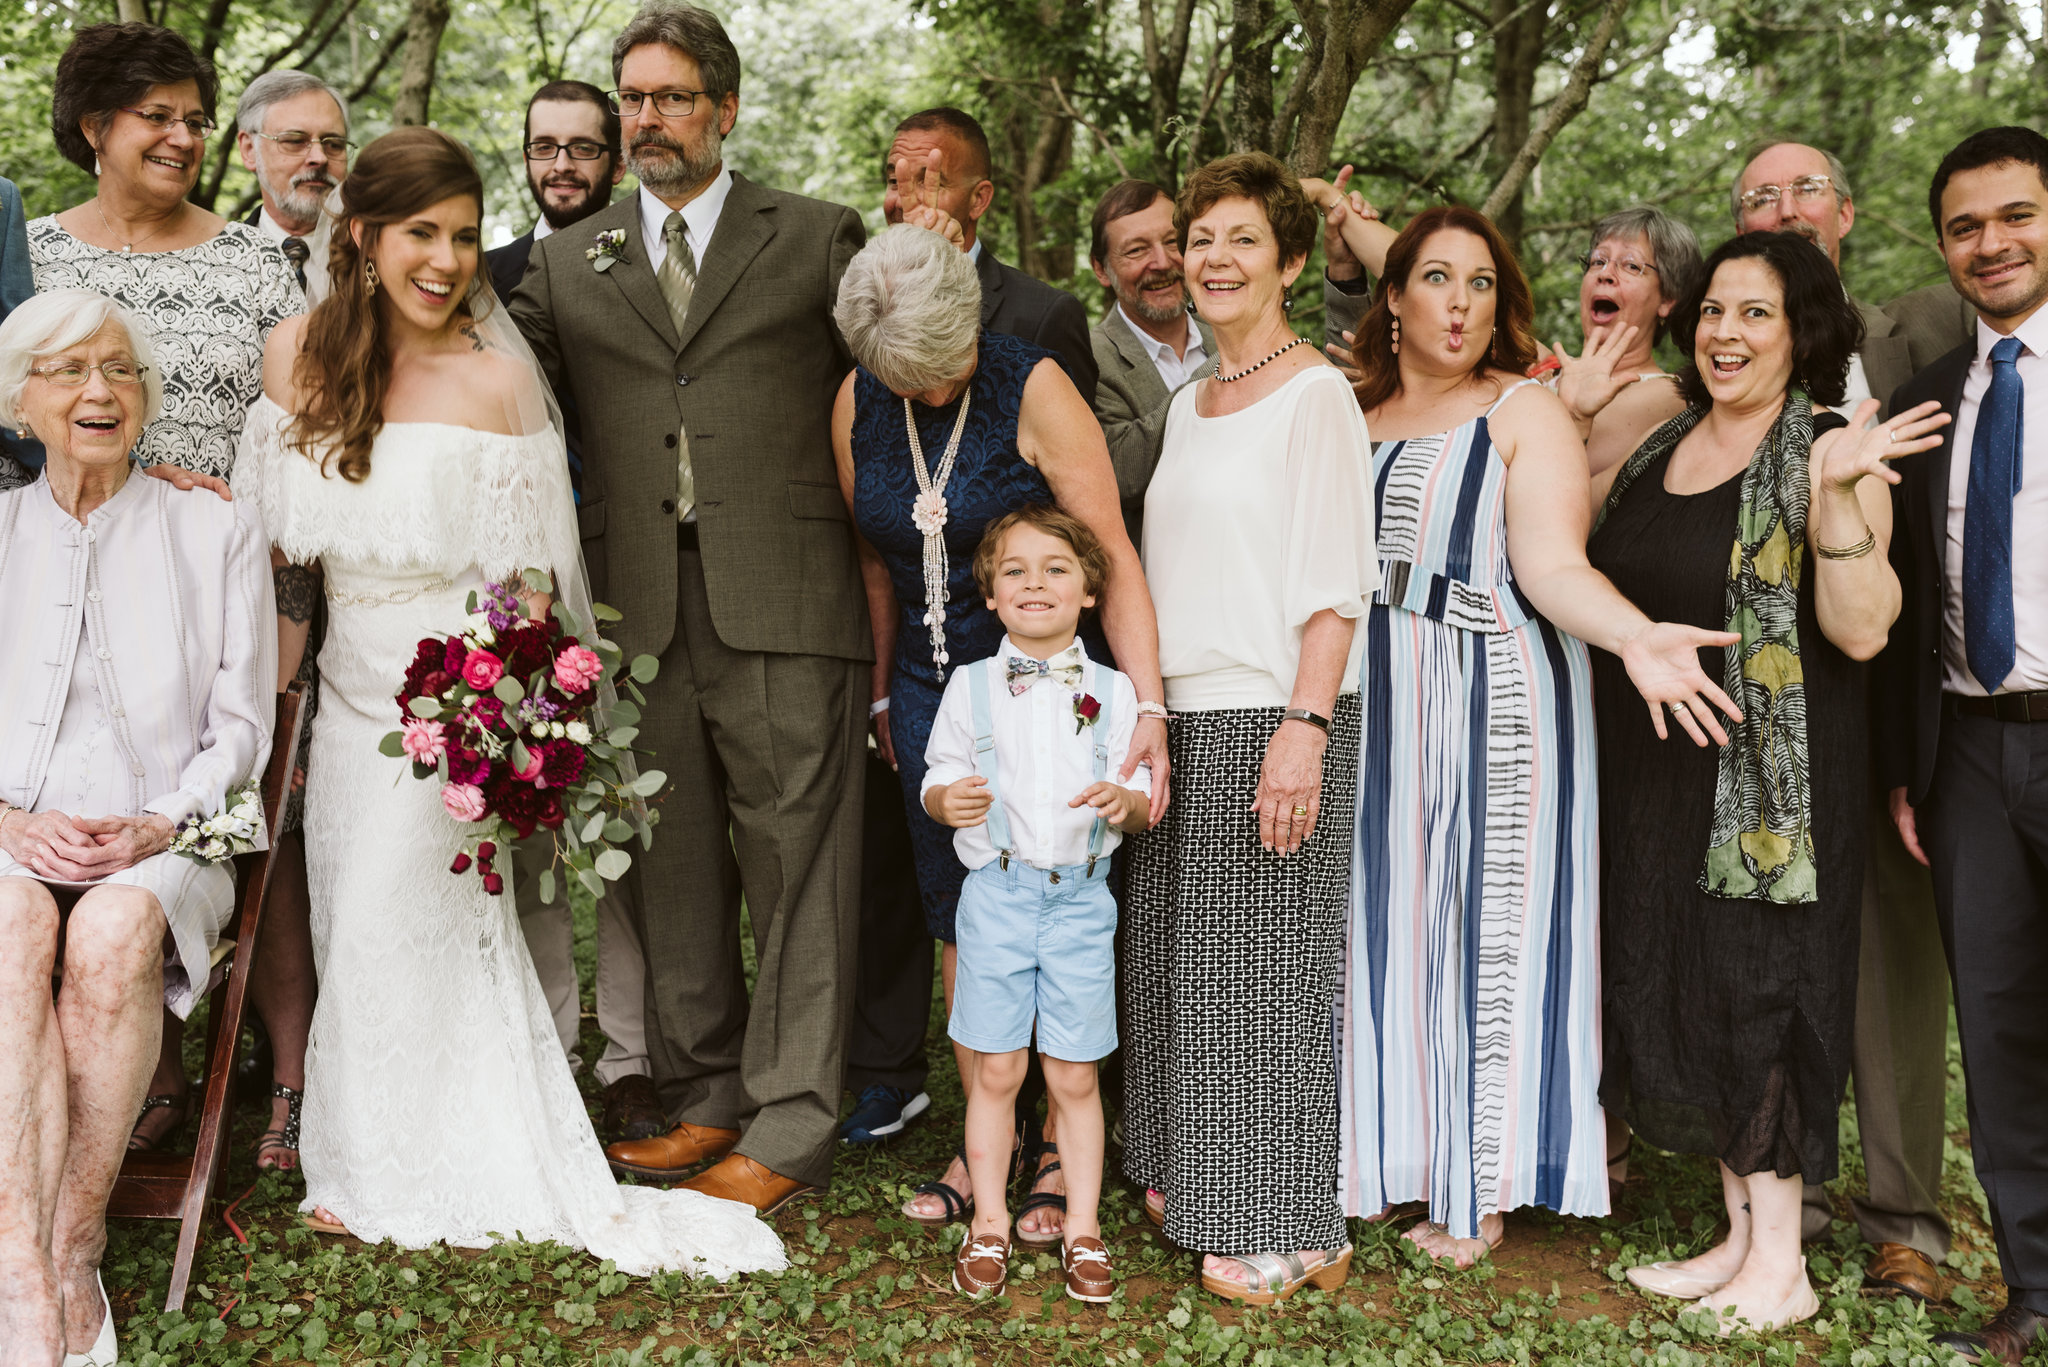  Annapolis, Quaker Wedding, Maryland Wedding Photographer, Intimate, Small Wedding, Vintage, DIY, Silly Family Portrait, Bride and Groom with Family 